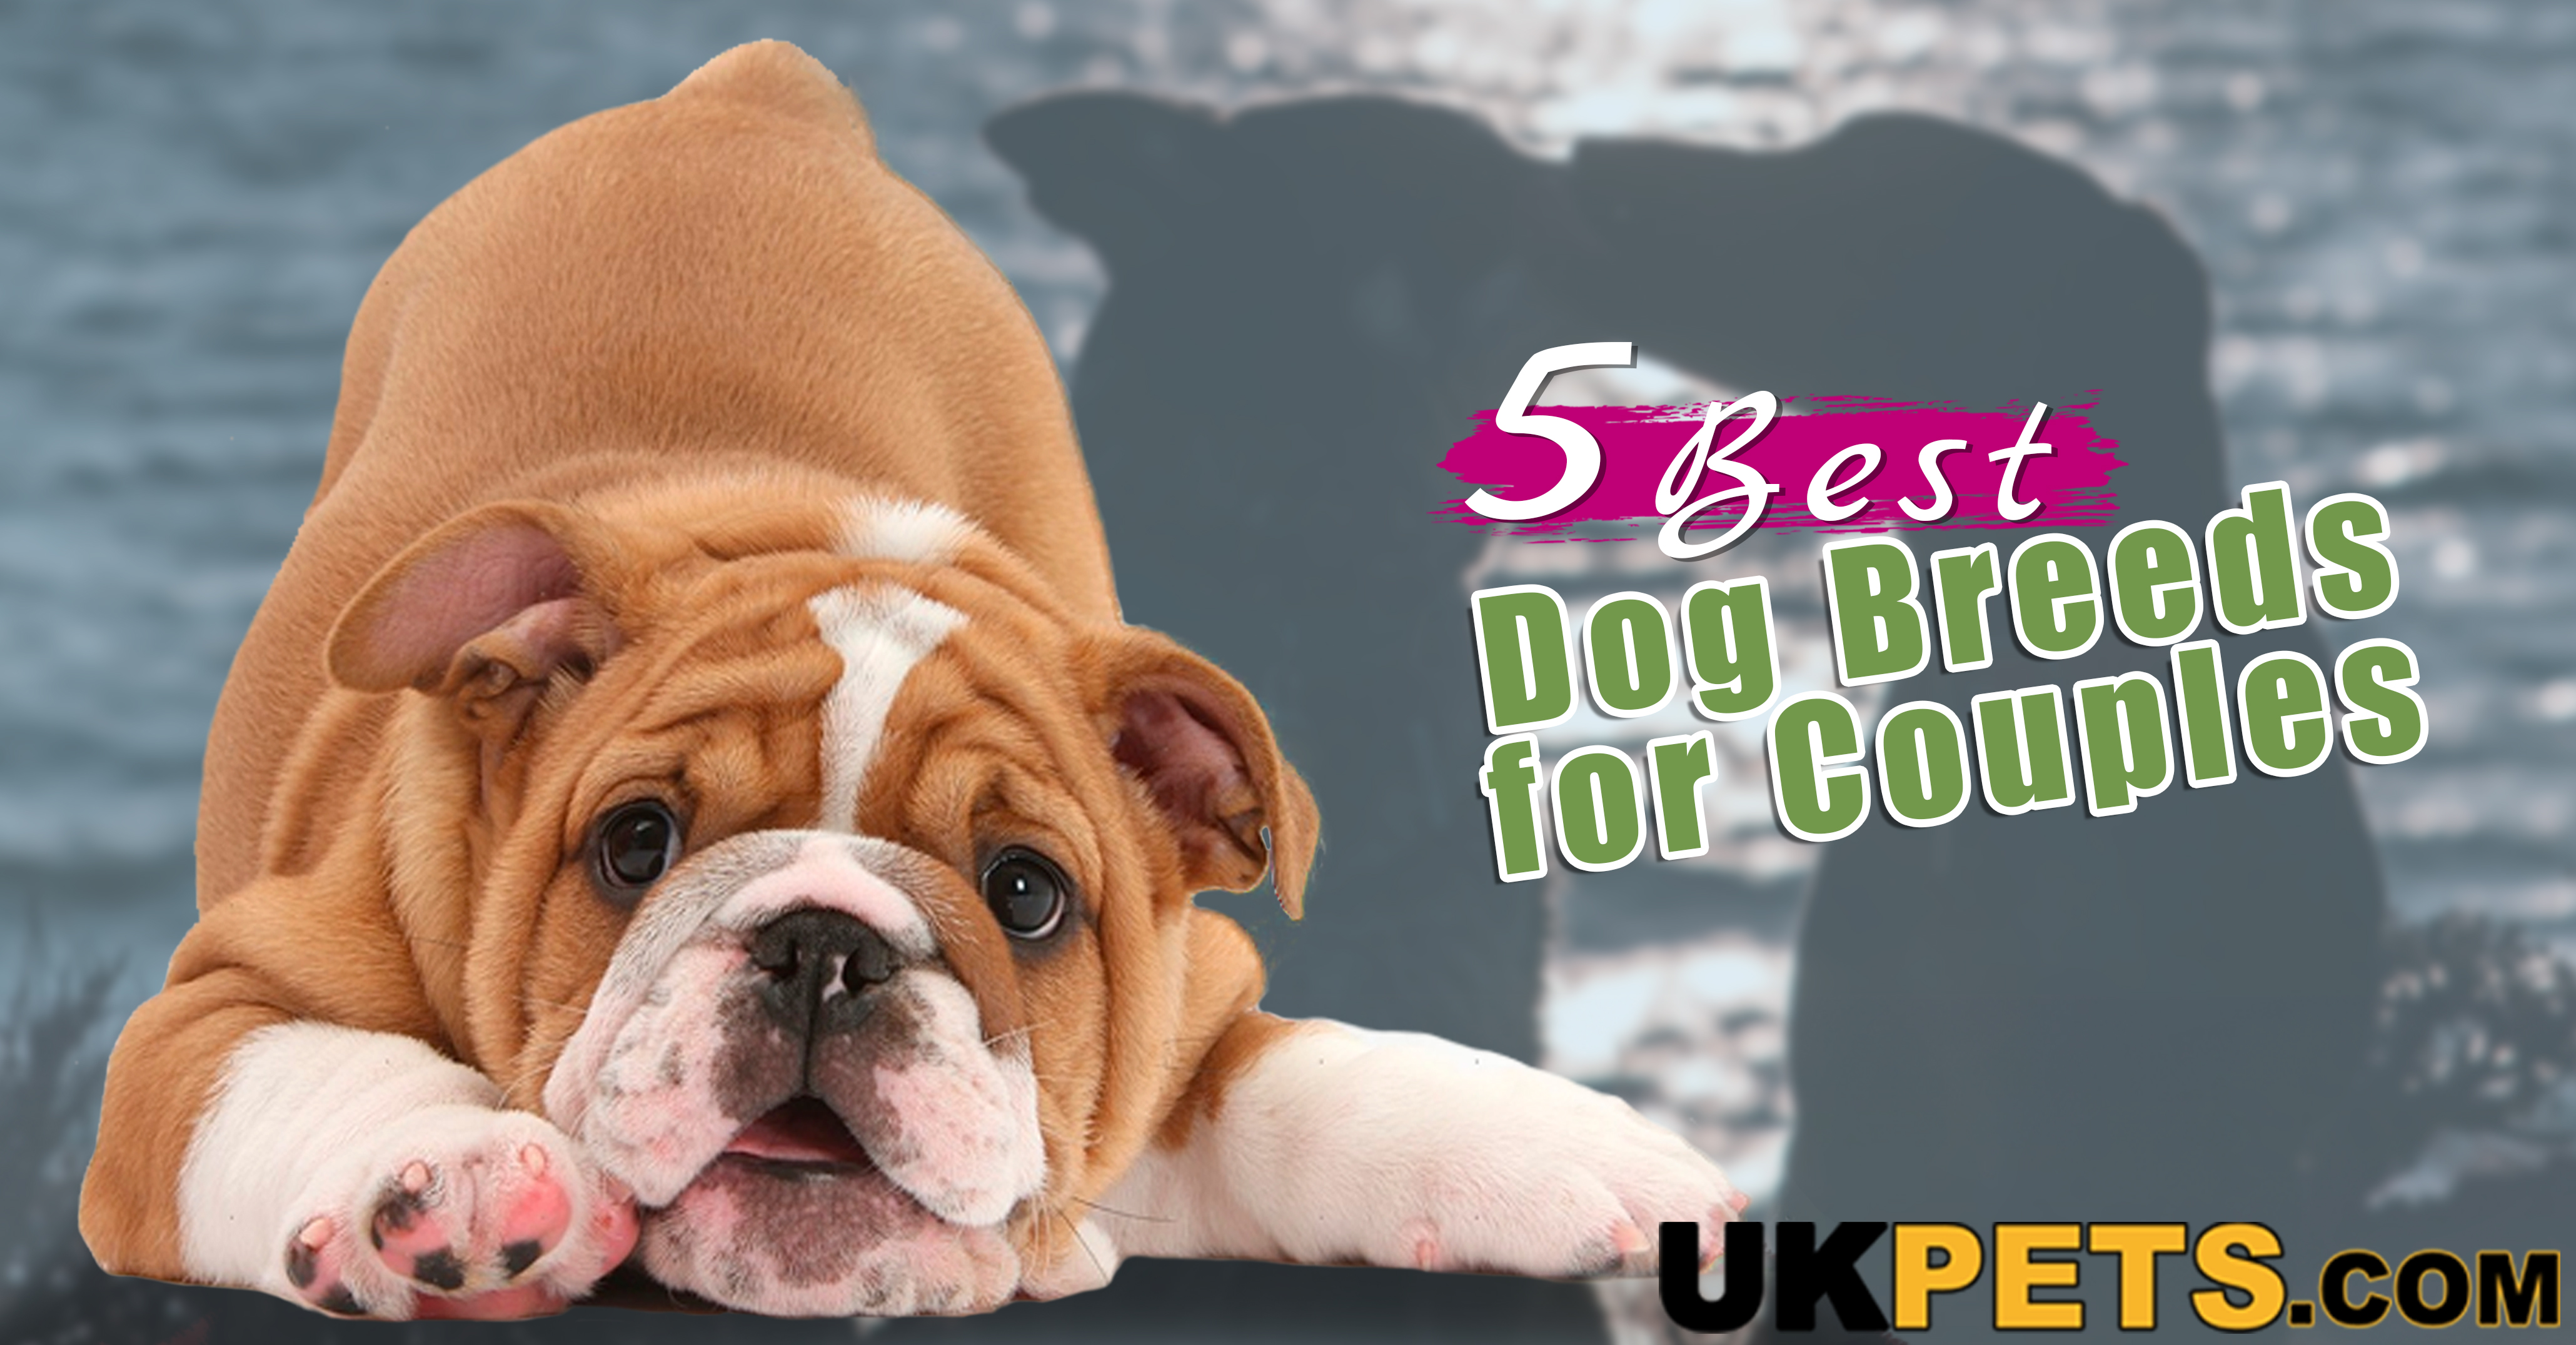 What Are the 5 Best Dog Breeds for Busy Couples | UK Pets